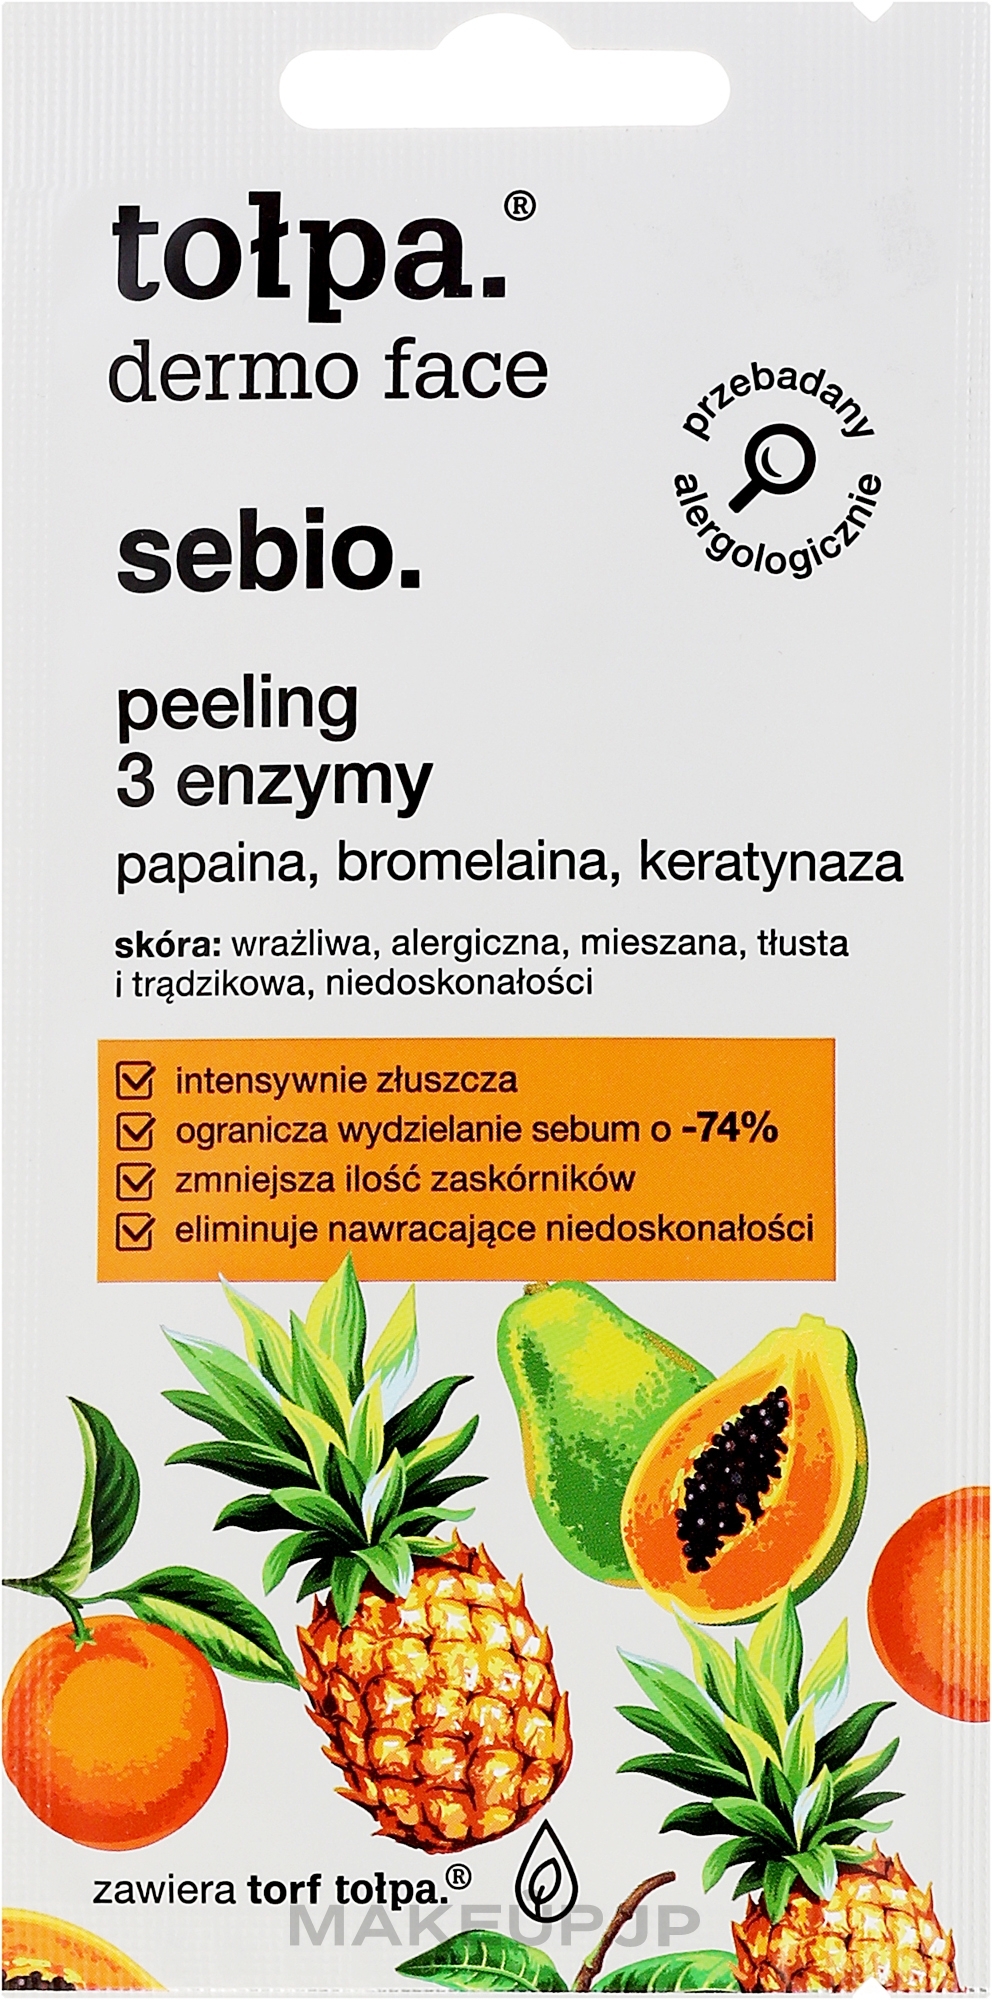 Cleansing Facial Mask-Peeling - Tolpa Dermo Face Sebio Cleansing Mask-Peeling (mini size) — photo 8 ml